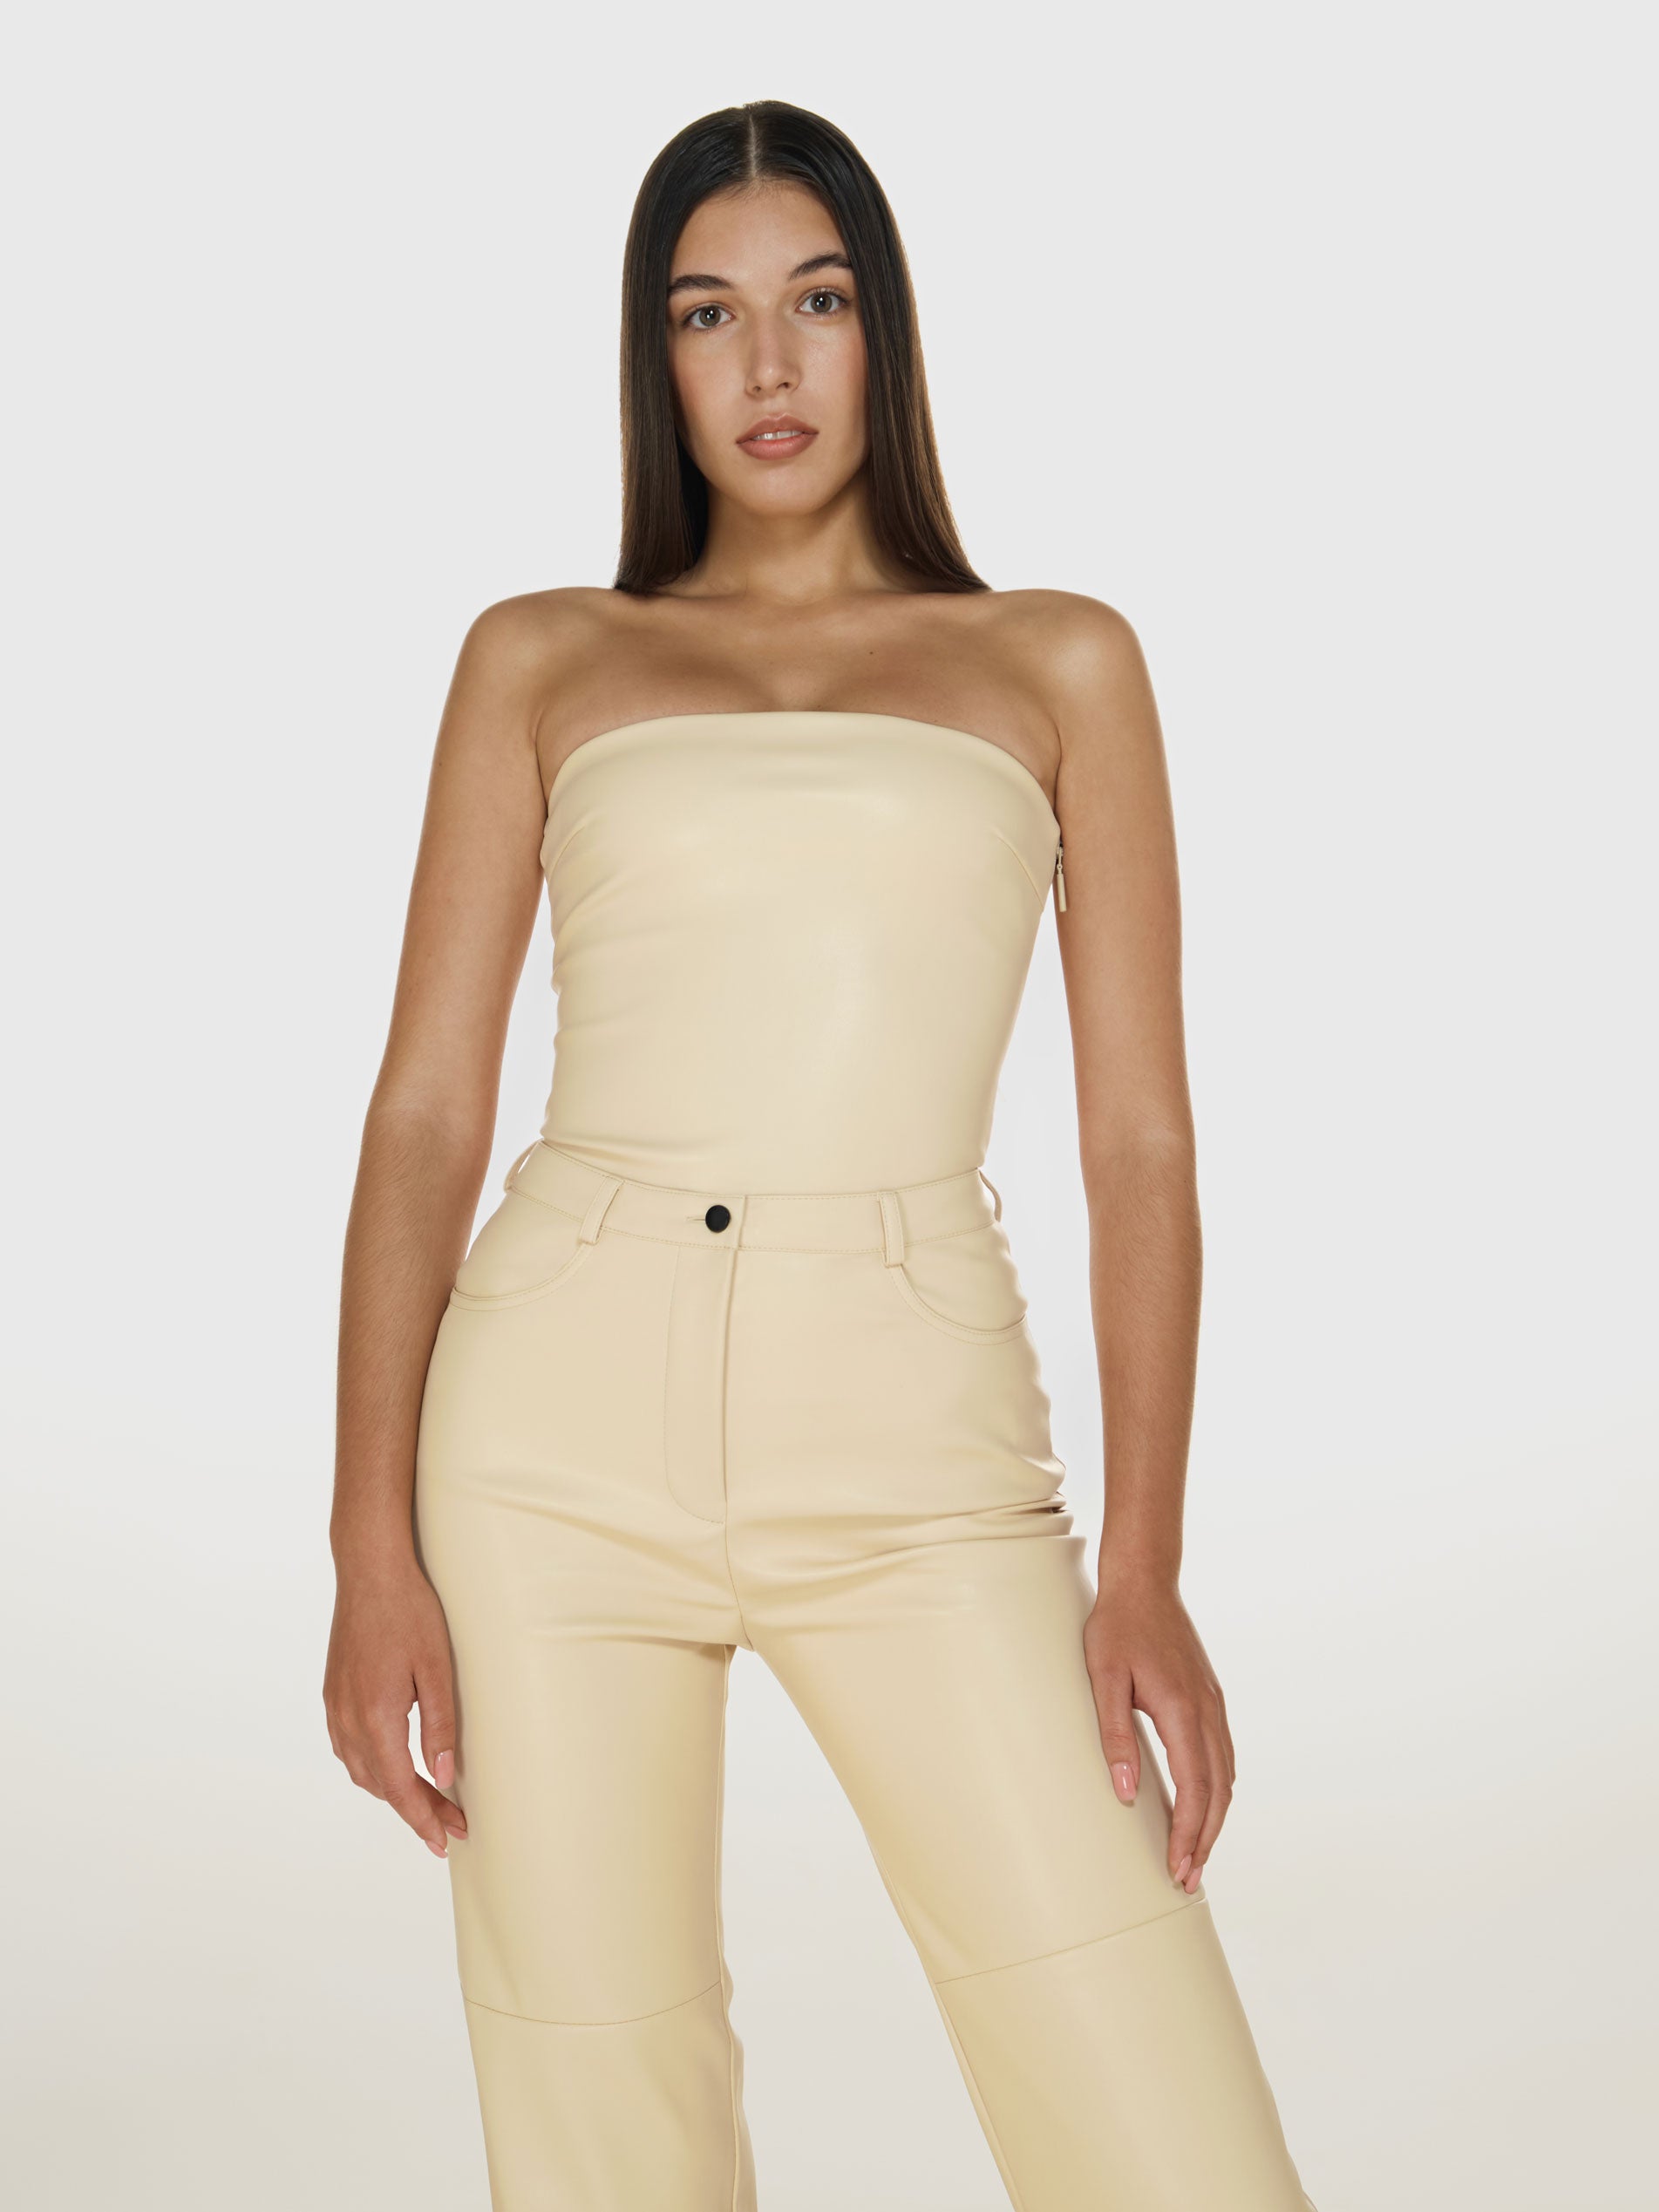 Cowboy shot of a girl in a cream vegan leather tube top and cream vegan leather pants with straight leg